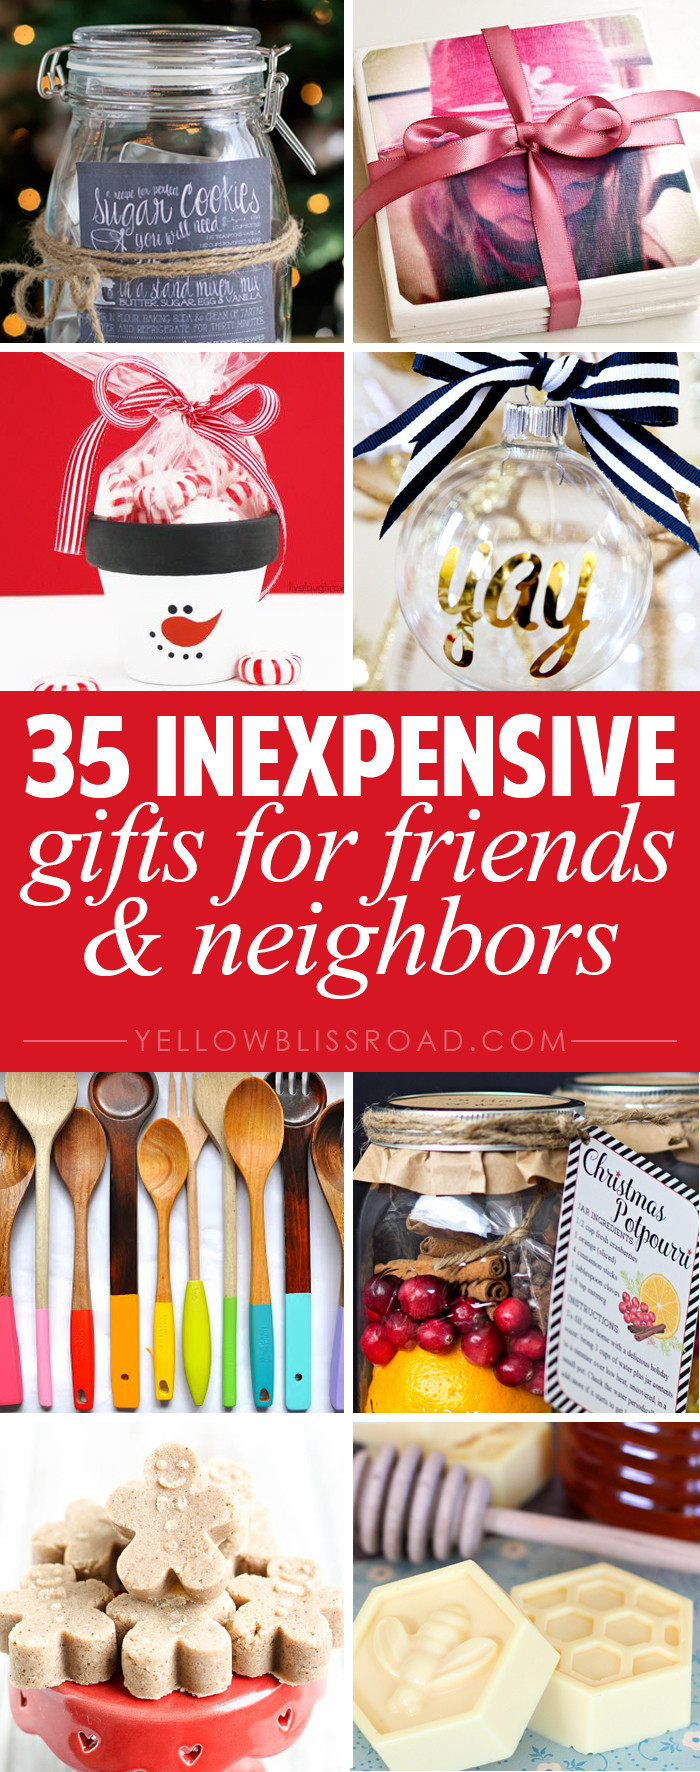 Holiday Gift Ideas For Friends
 35 Gift Ideas for Neighbors and Friends Yellow Bliss Road